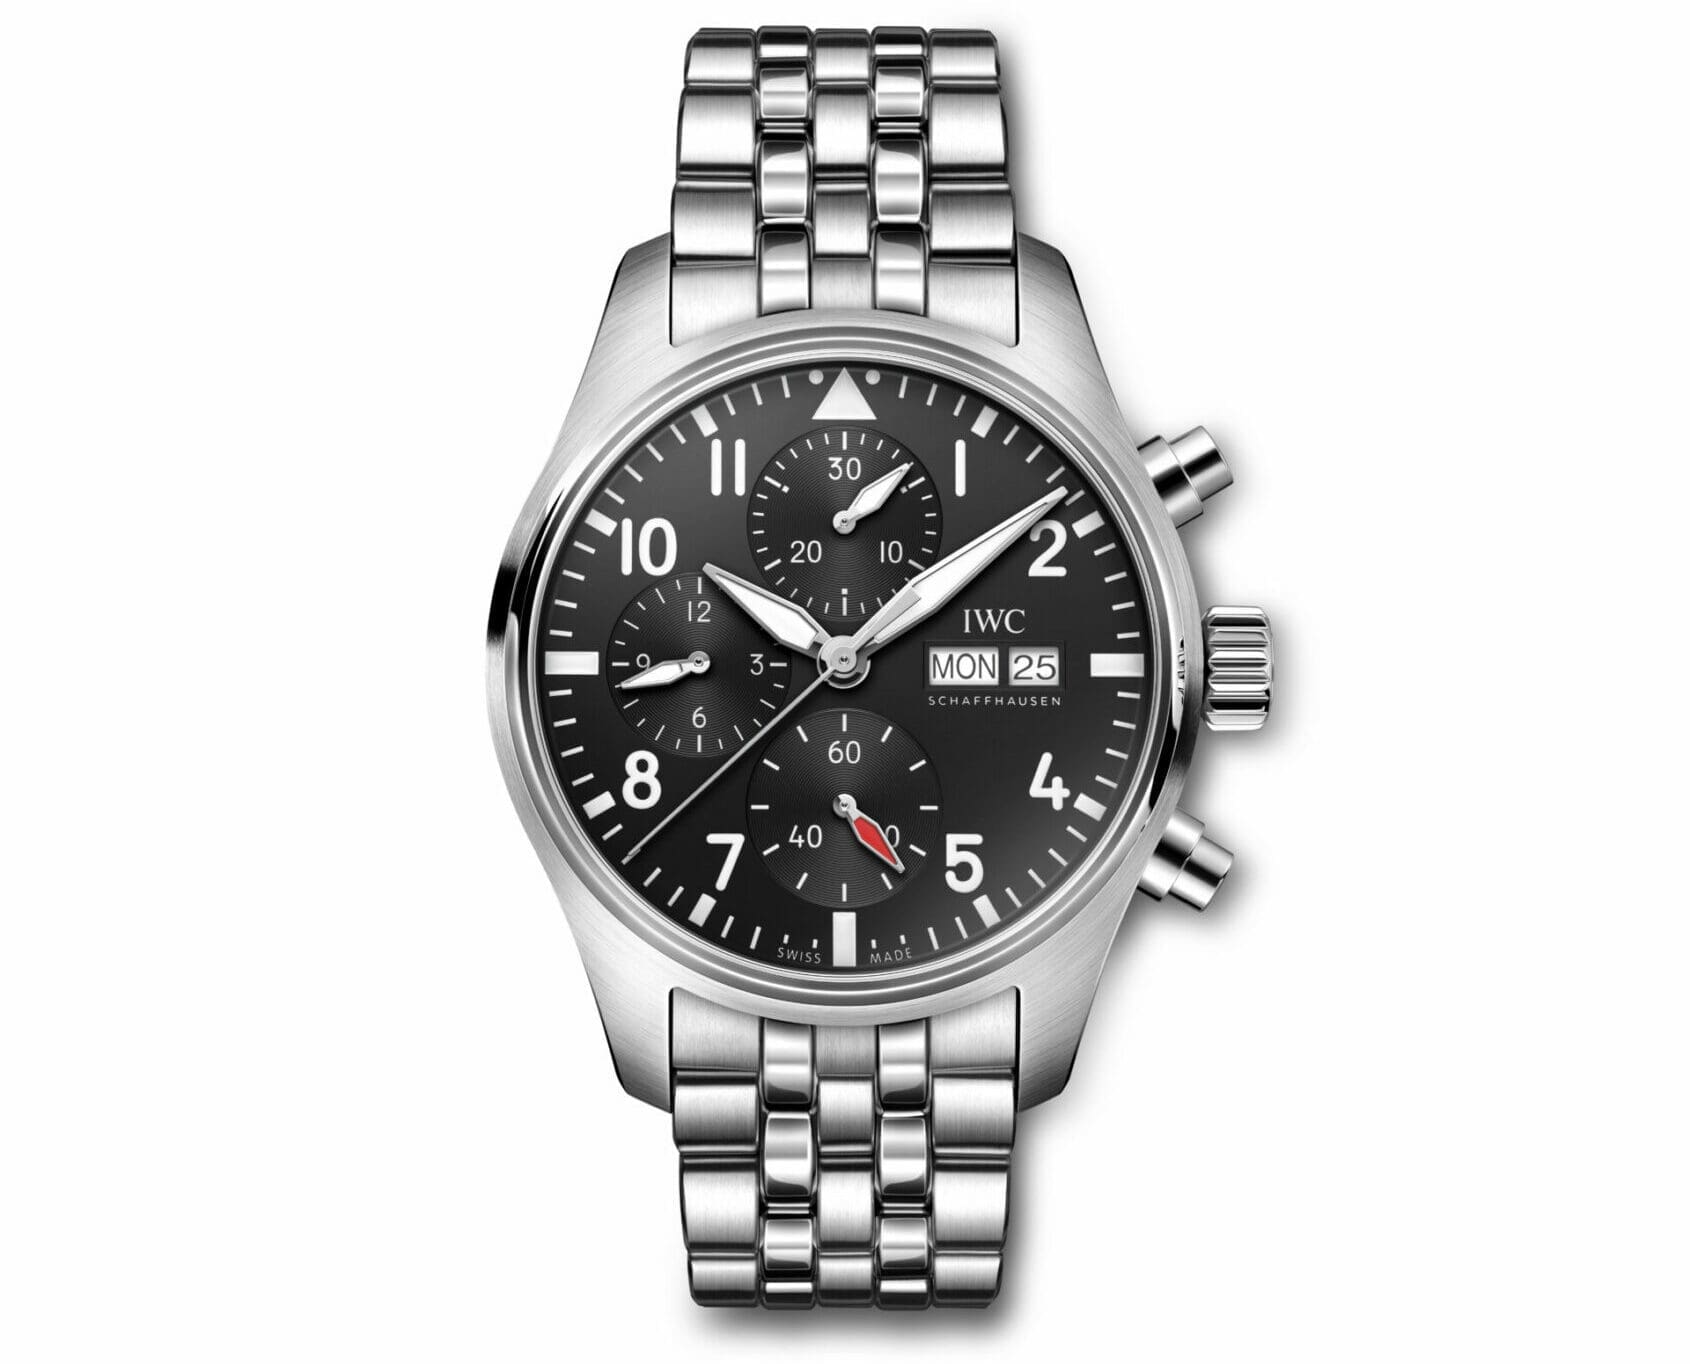 A black dial finally makes its way into the IWC Pilot’s Watch Chronograph 41 collection